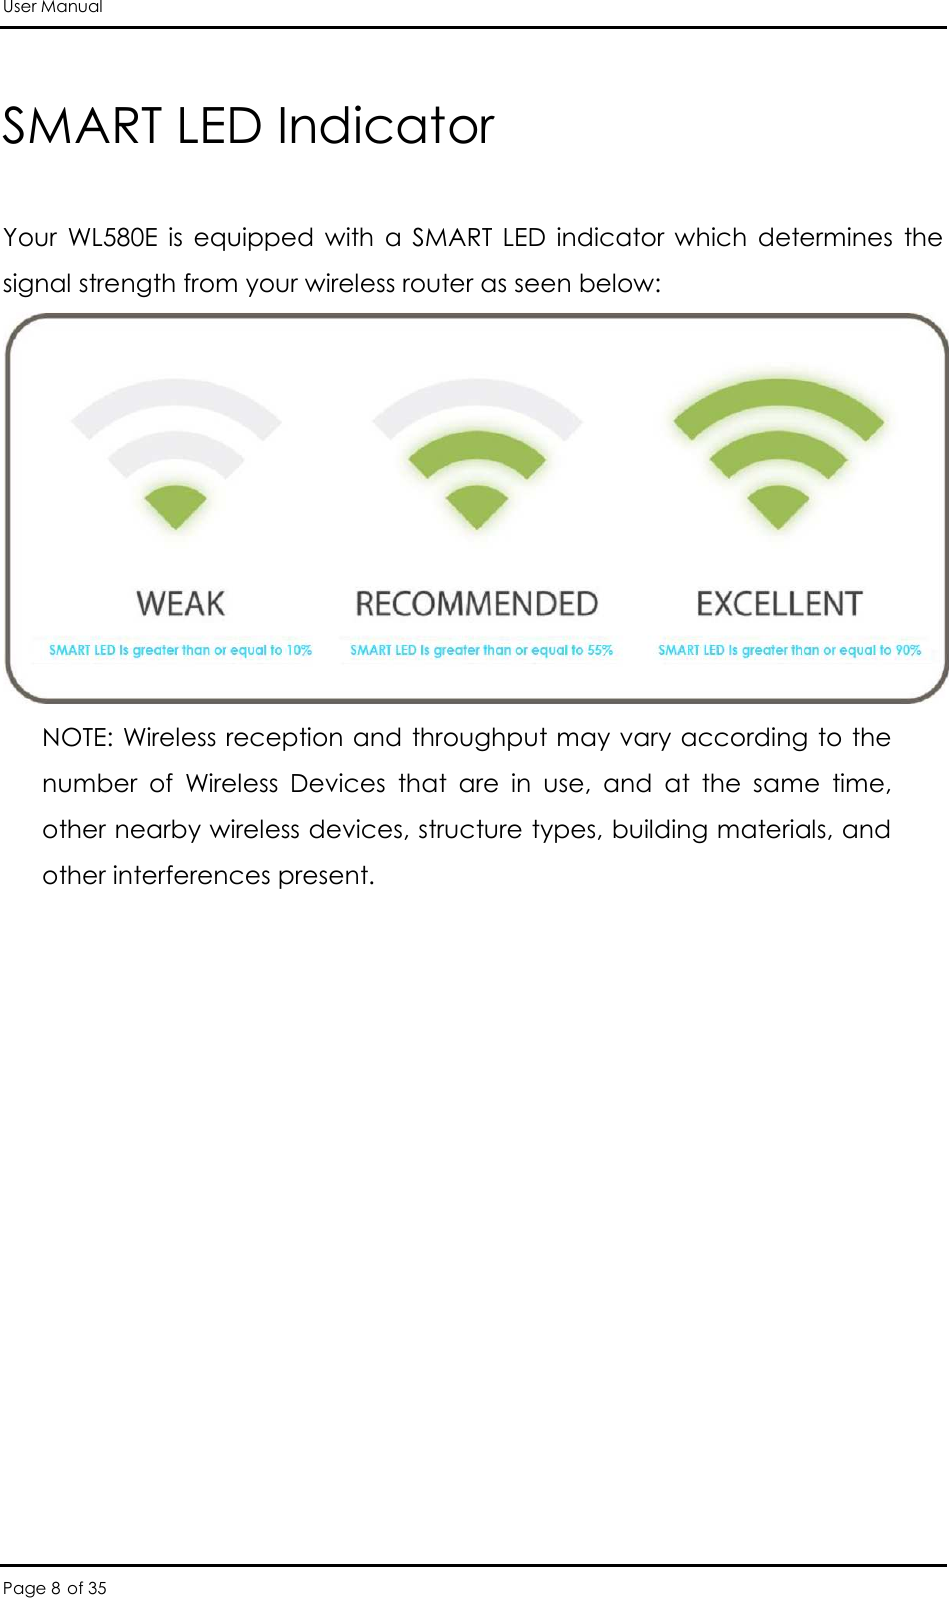 User Manual Page 8 of 35 SMART LED Indicator   Your  WL580E  is  equipped  with  a  SMART  LED  indicator  which  determines  the signal strength from your wireless router as seen below:  NOTE: Wireless reception and throughput may vary according to the number  of  Wireless  Devices  that  are  in  use,  and  at  the  same  time, other nearby wireless devices, structure types, building materials, and other interferences present.   